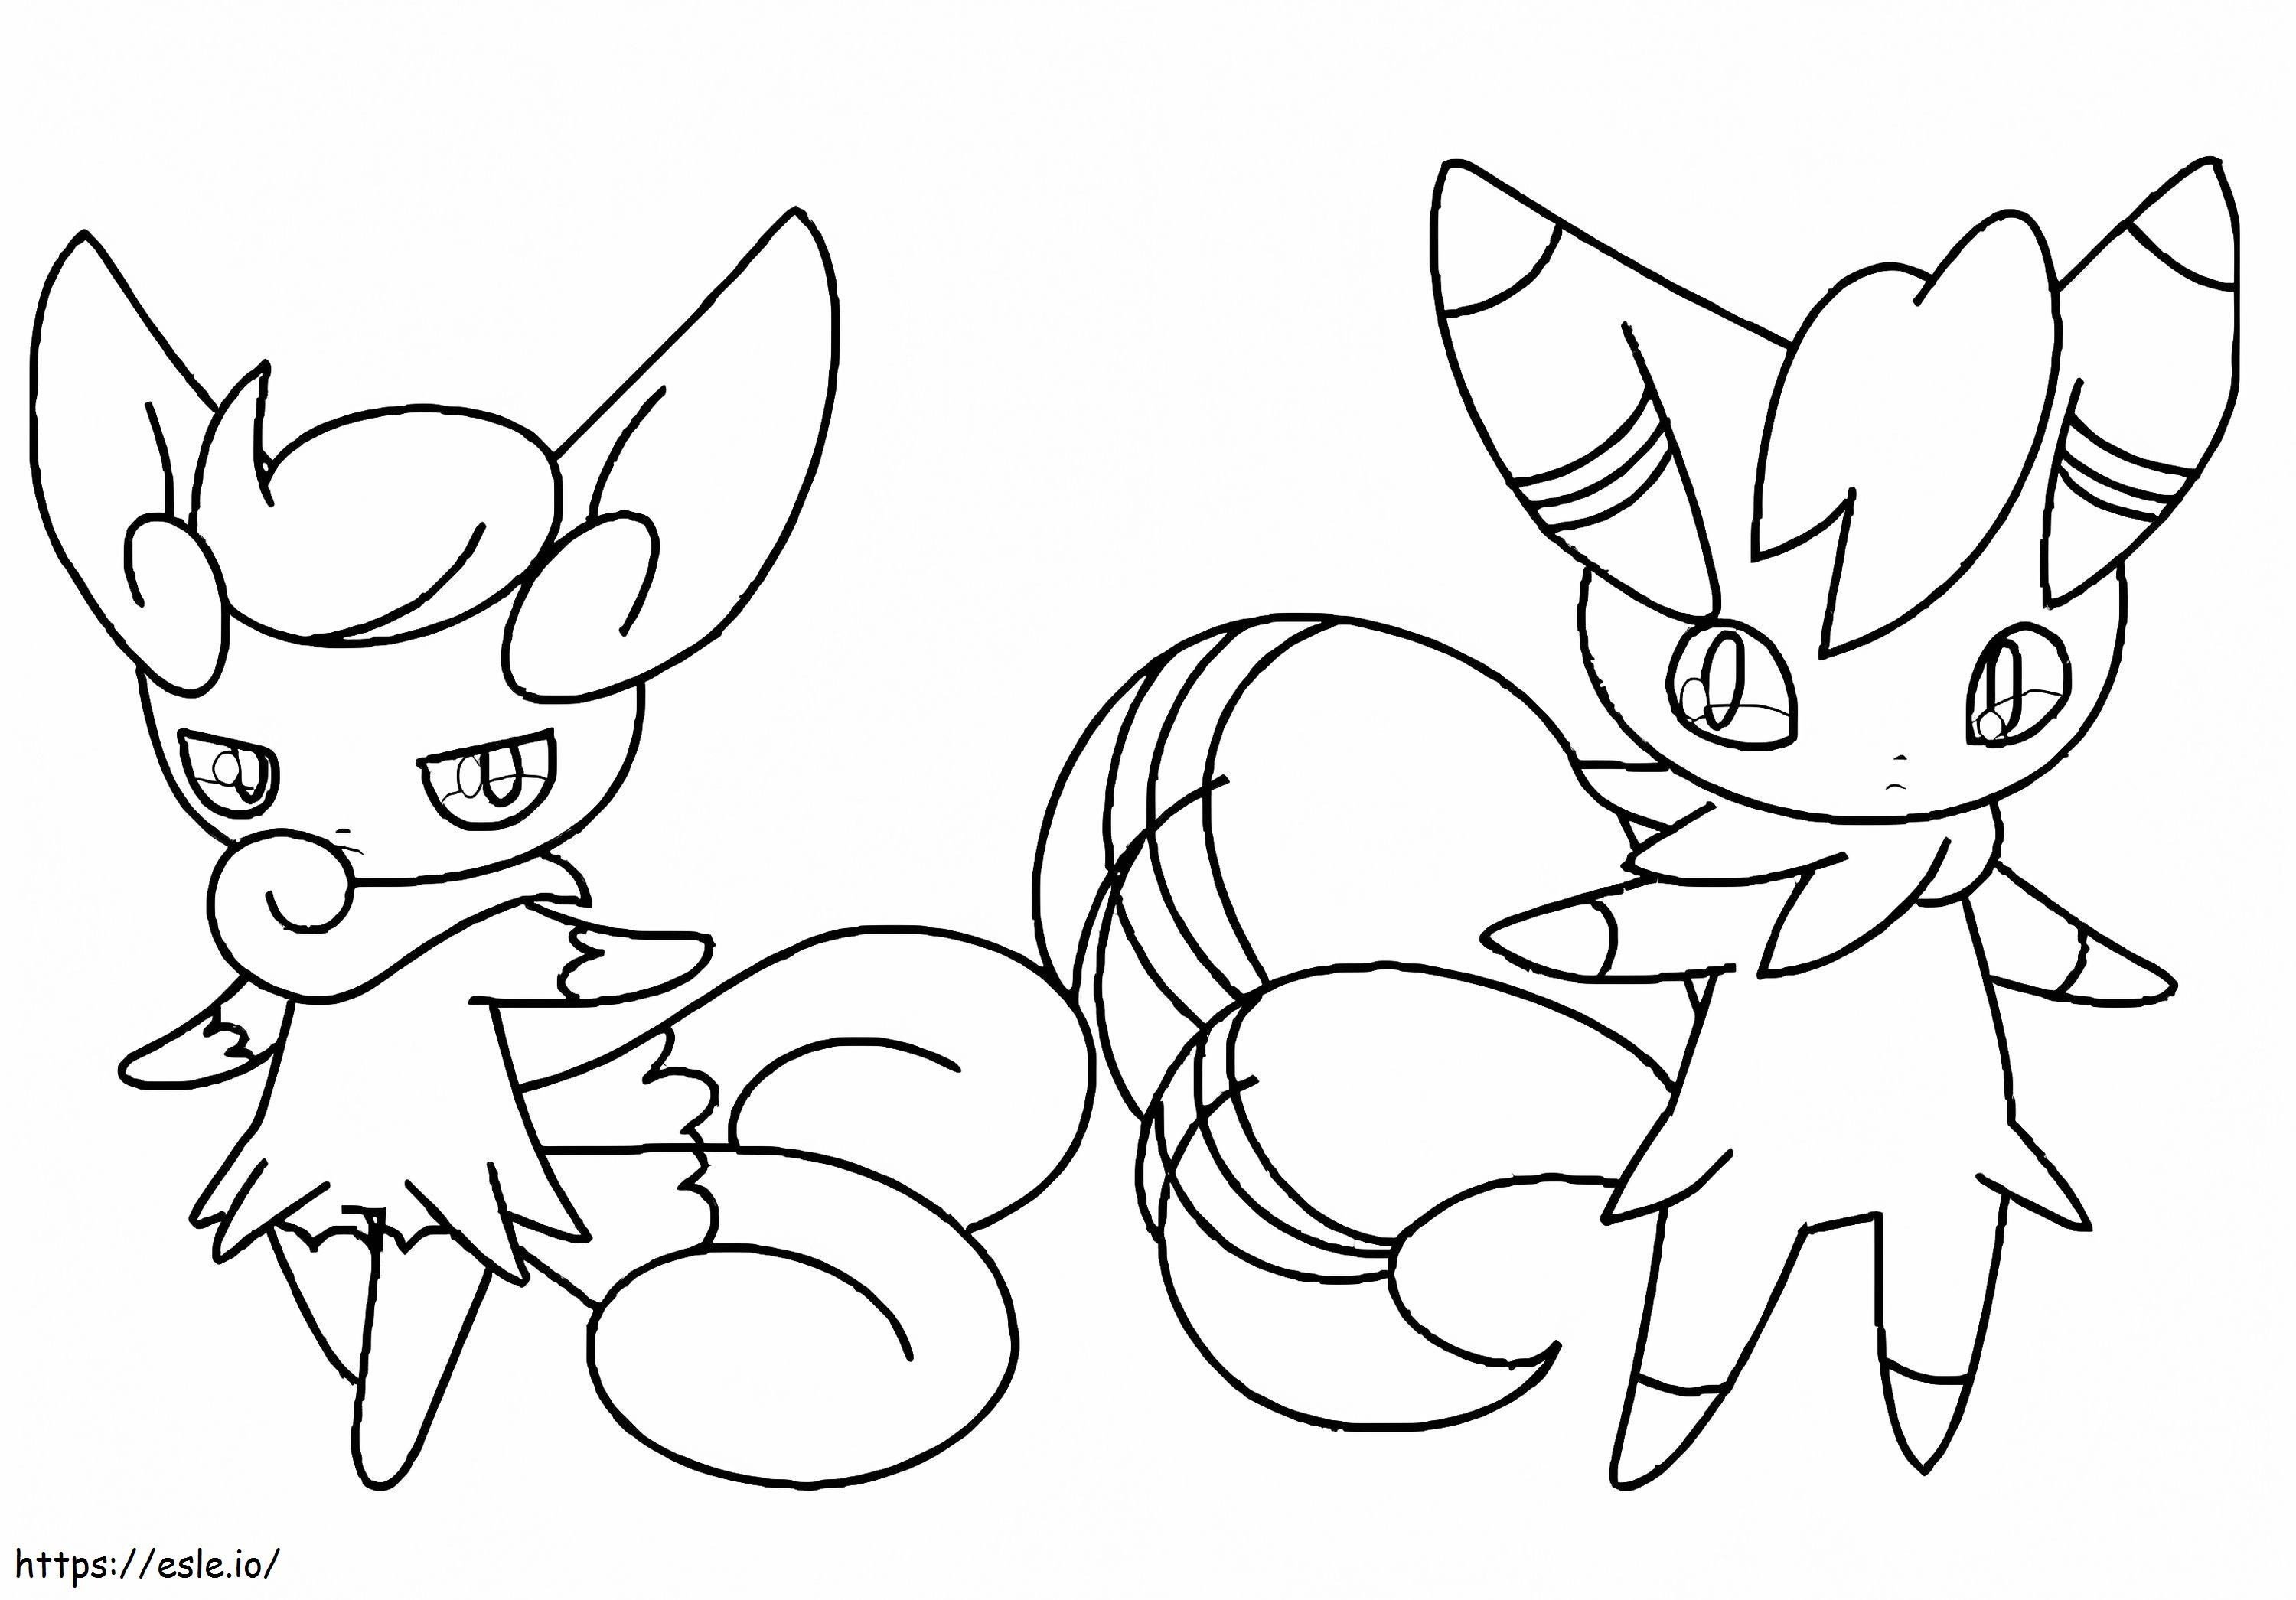 Meowstic Pokemon coloring page